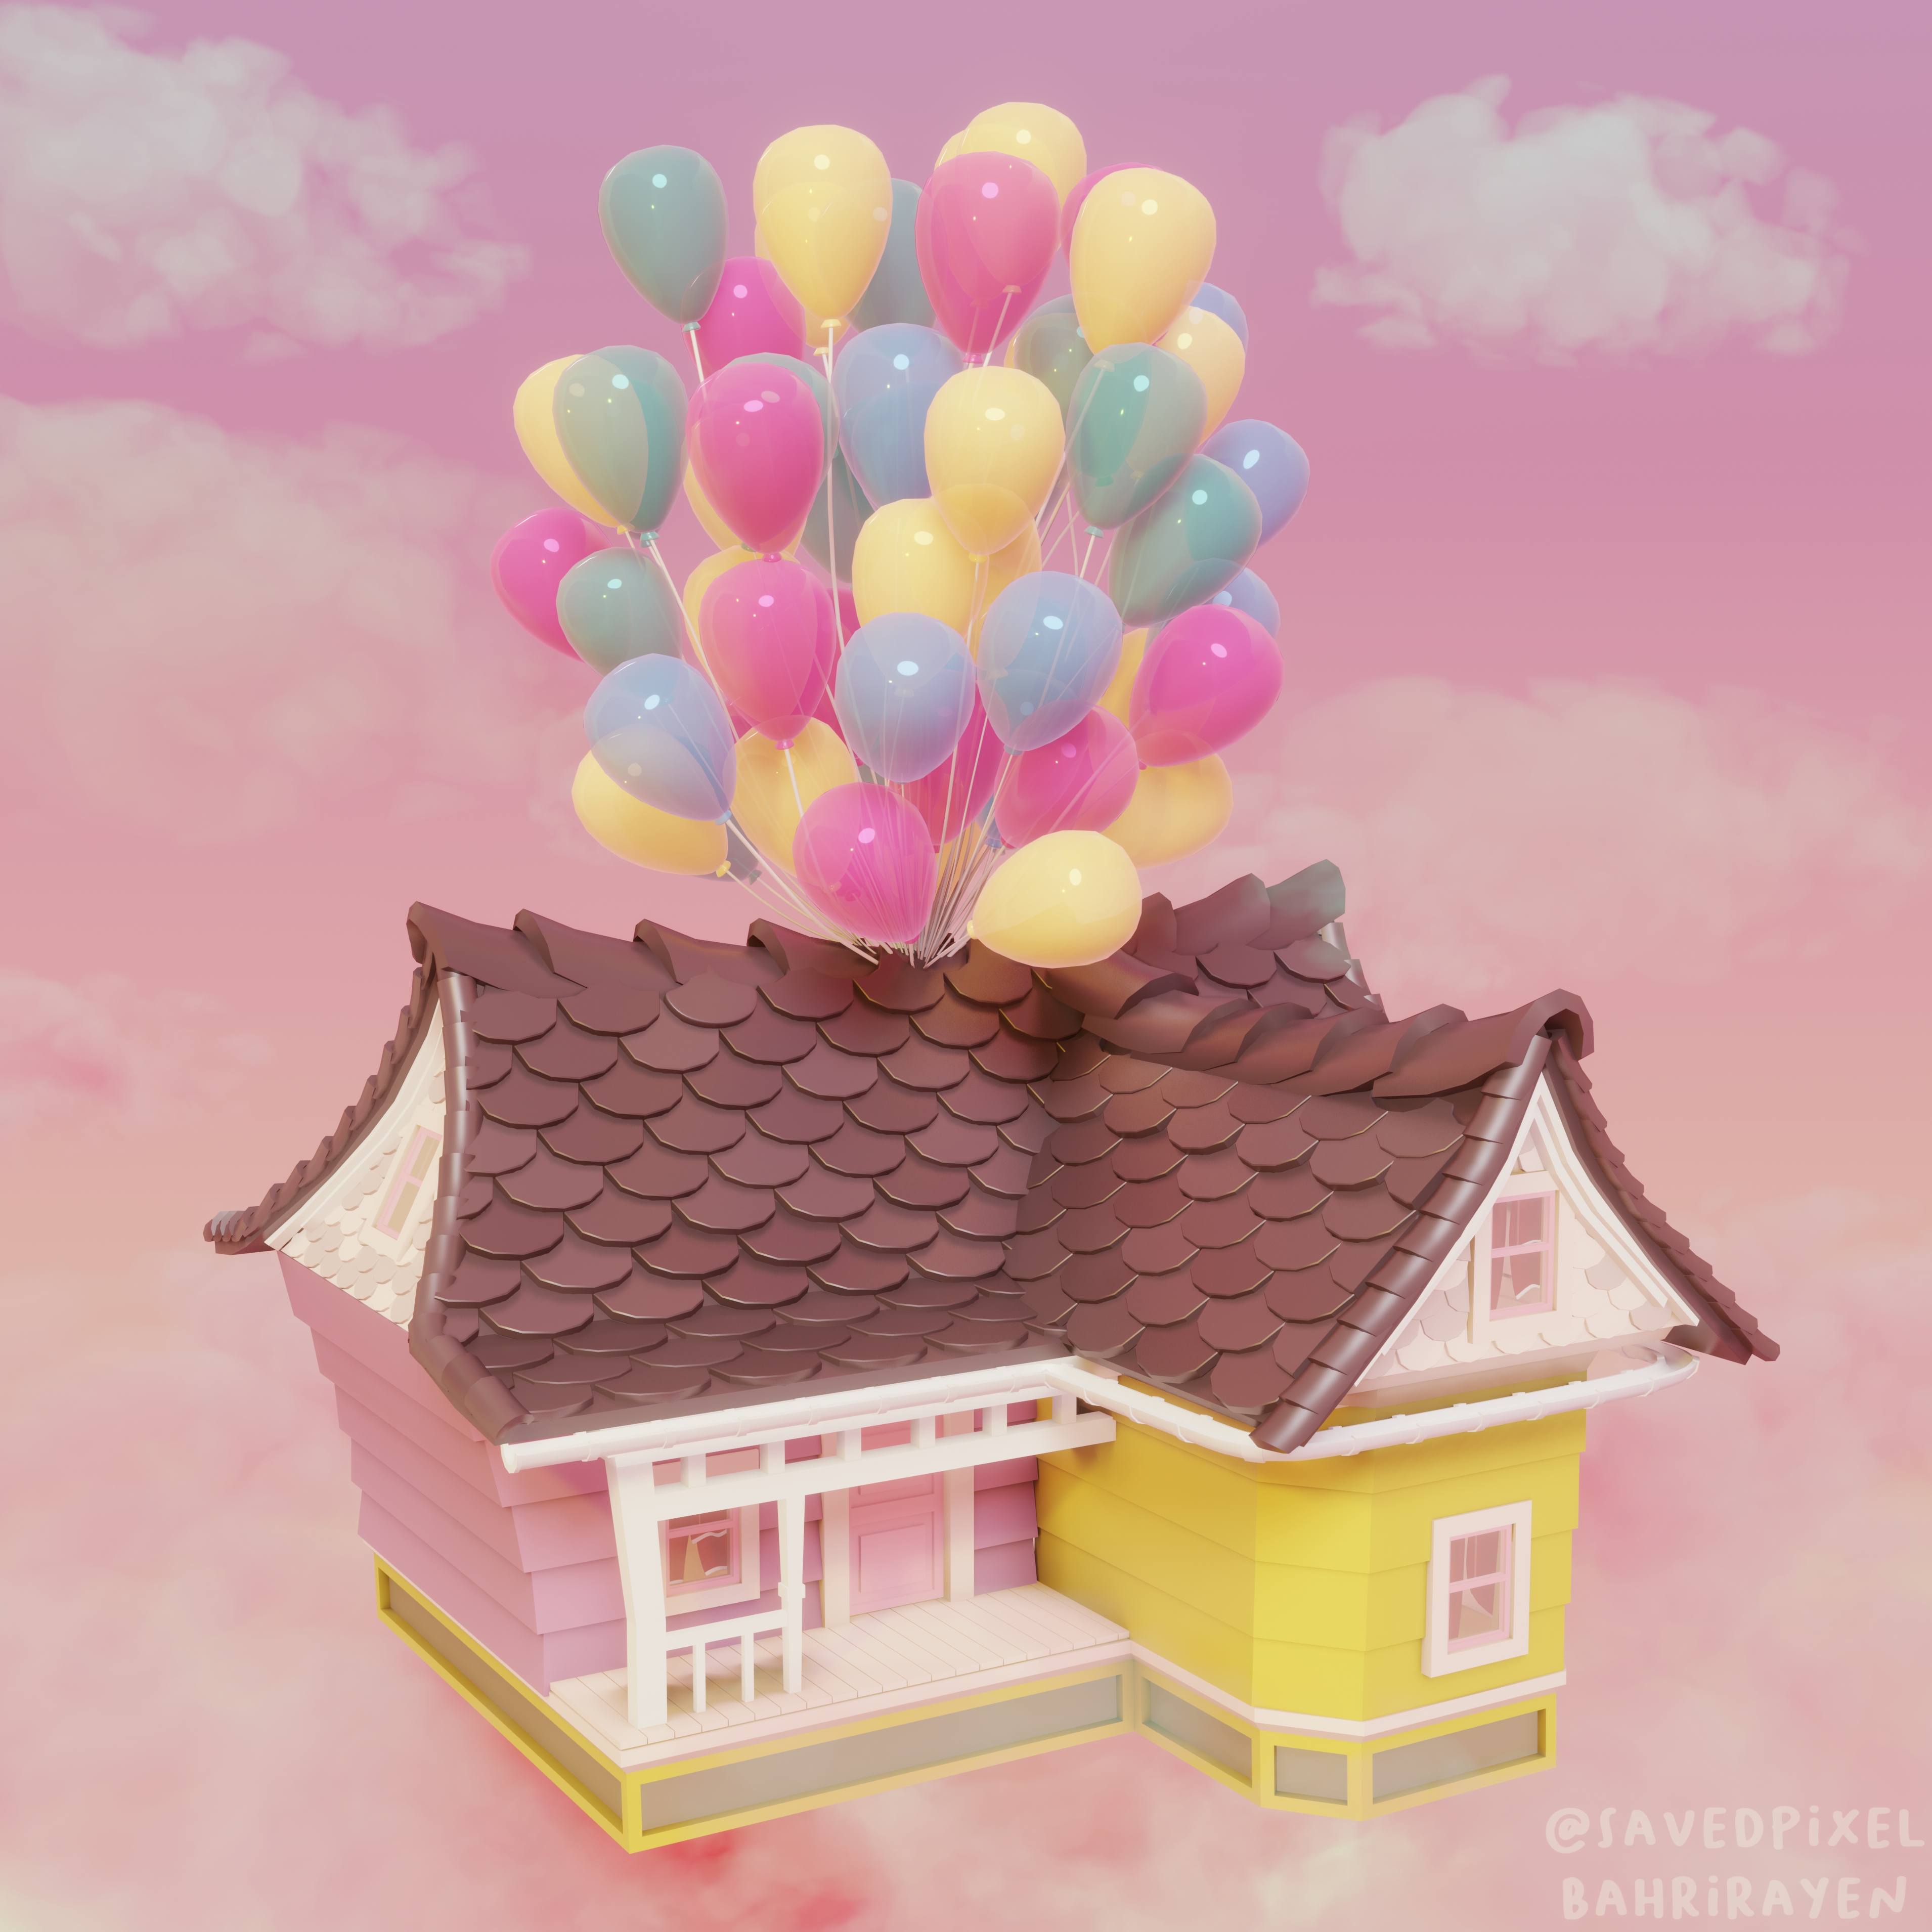 Adventure Balloon House - Finished Projects - Blender Artists Community